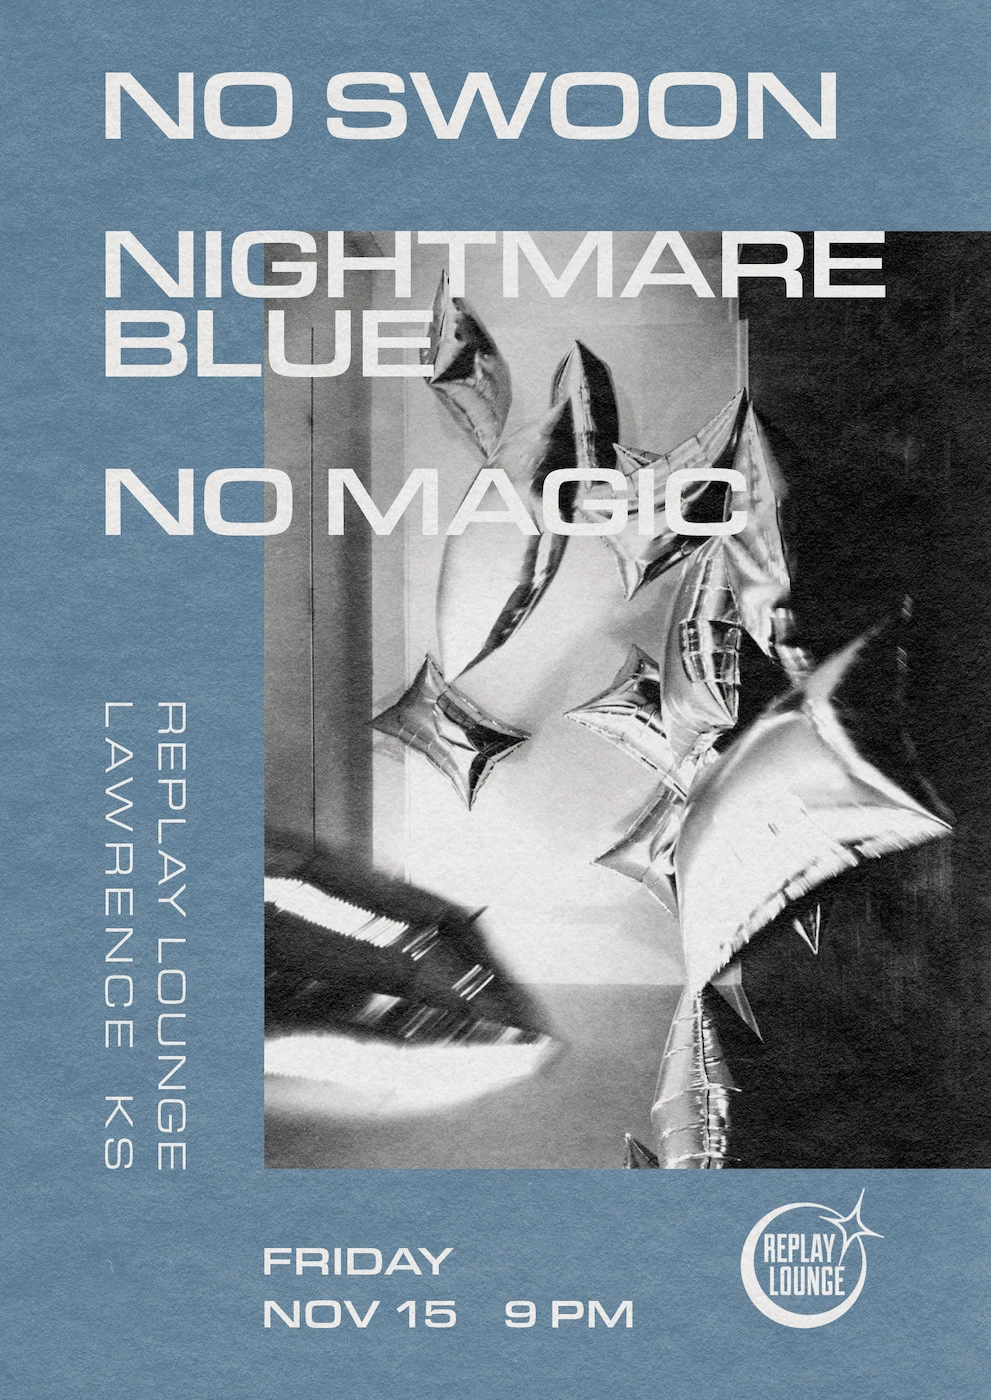 Poster for Nightmare Blue band featuring sky-blue background color, black and white photograph of bouncing metallic square-balloons, and uppercase text